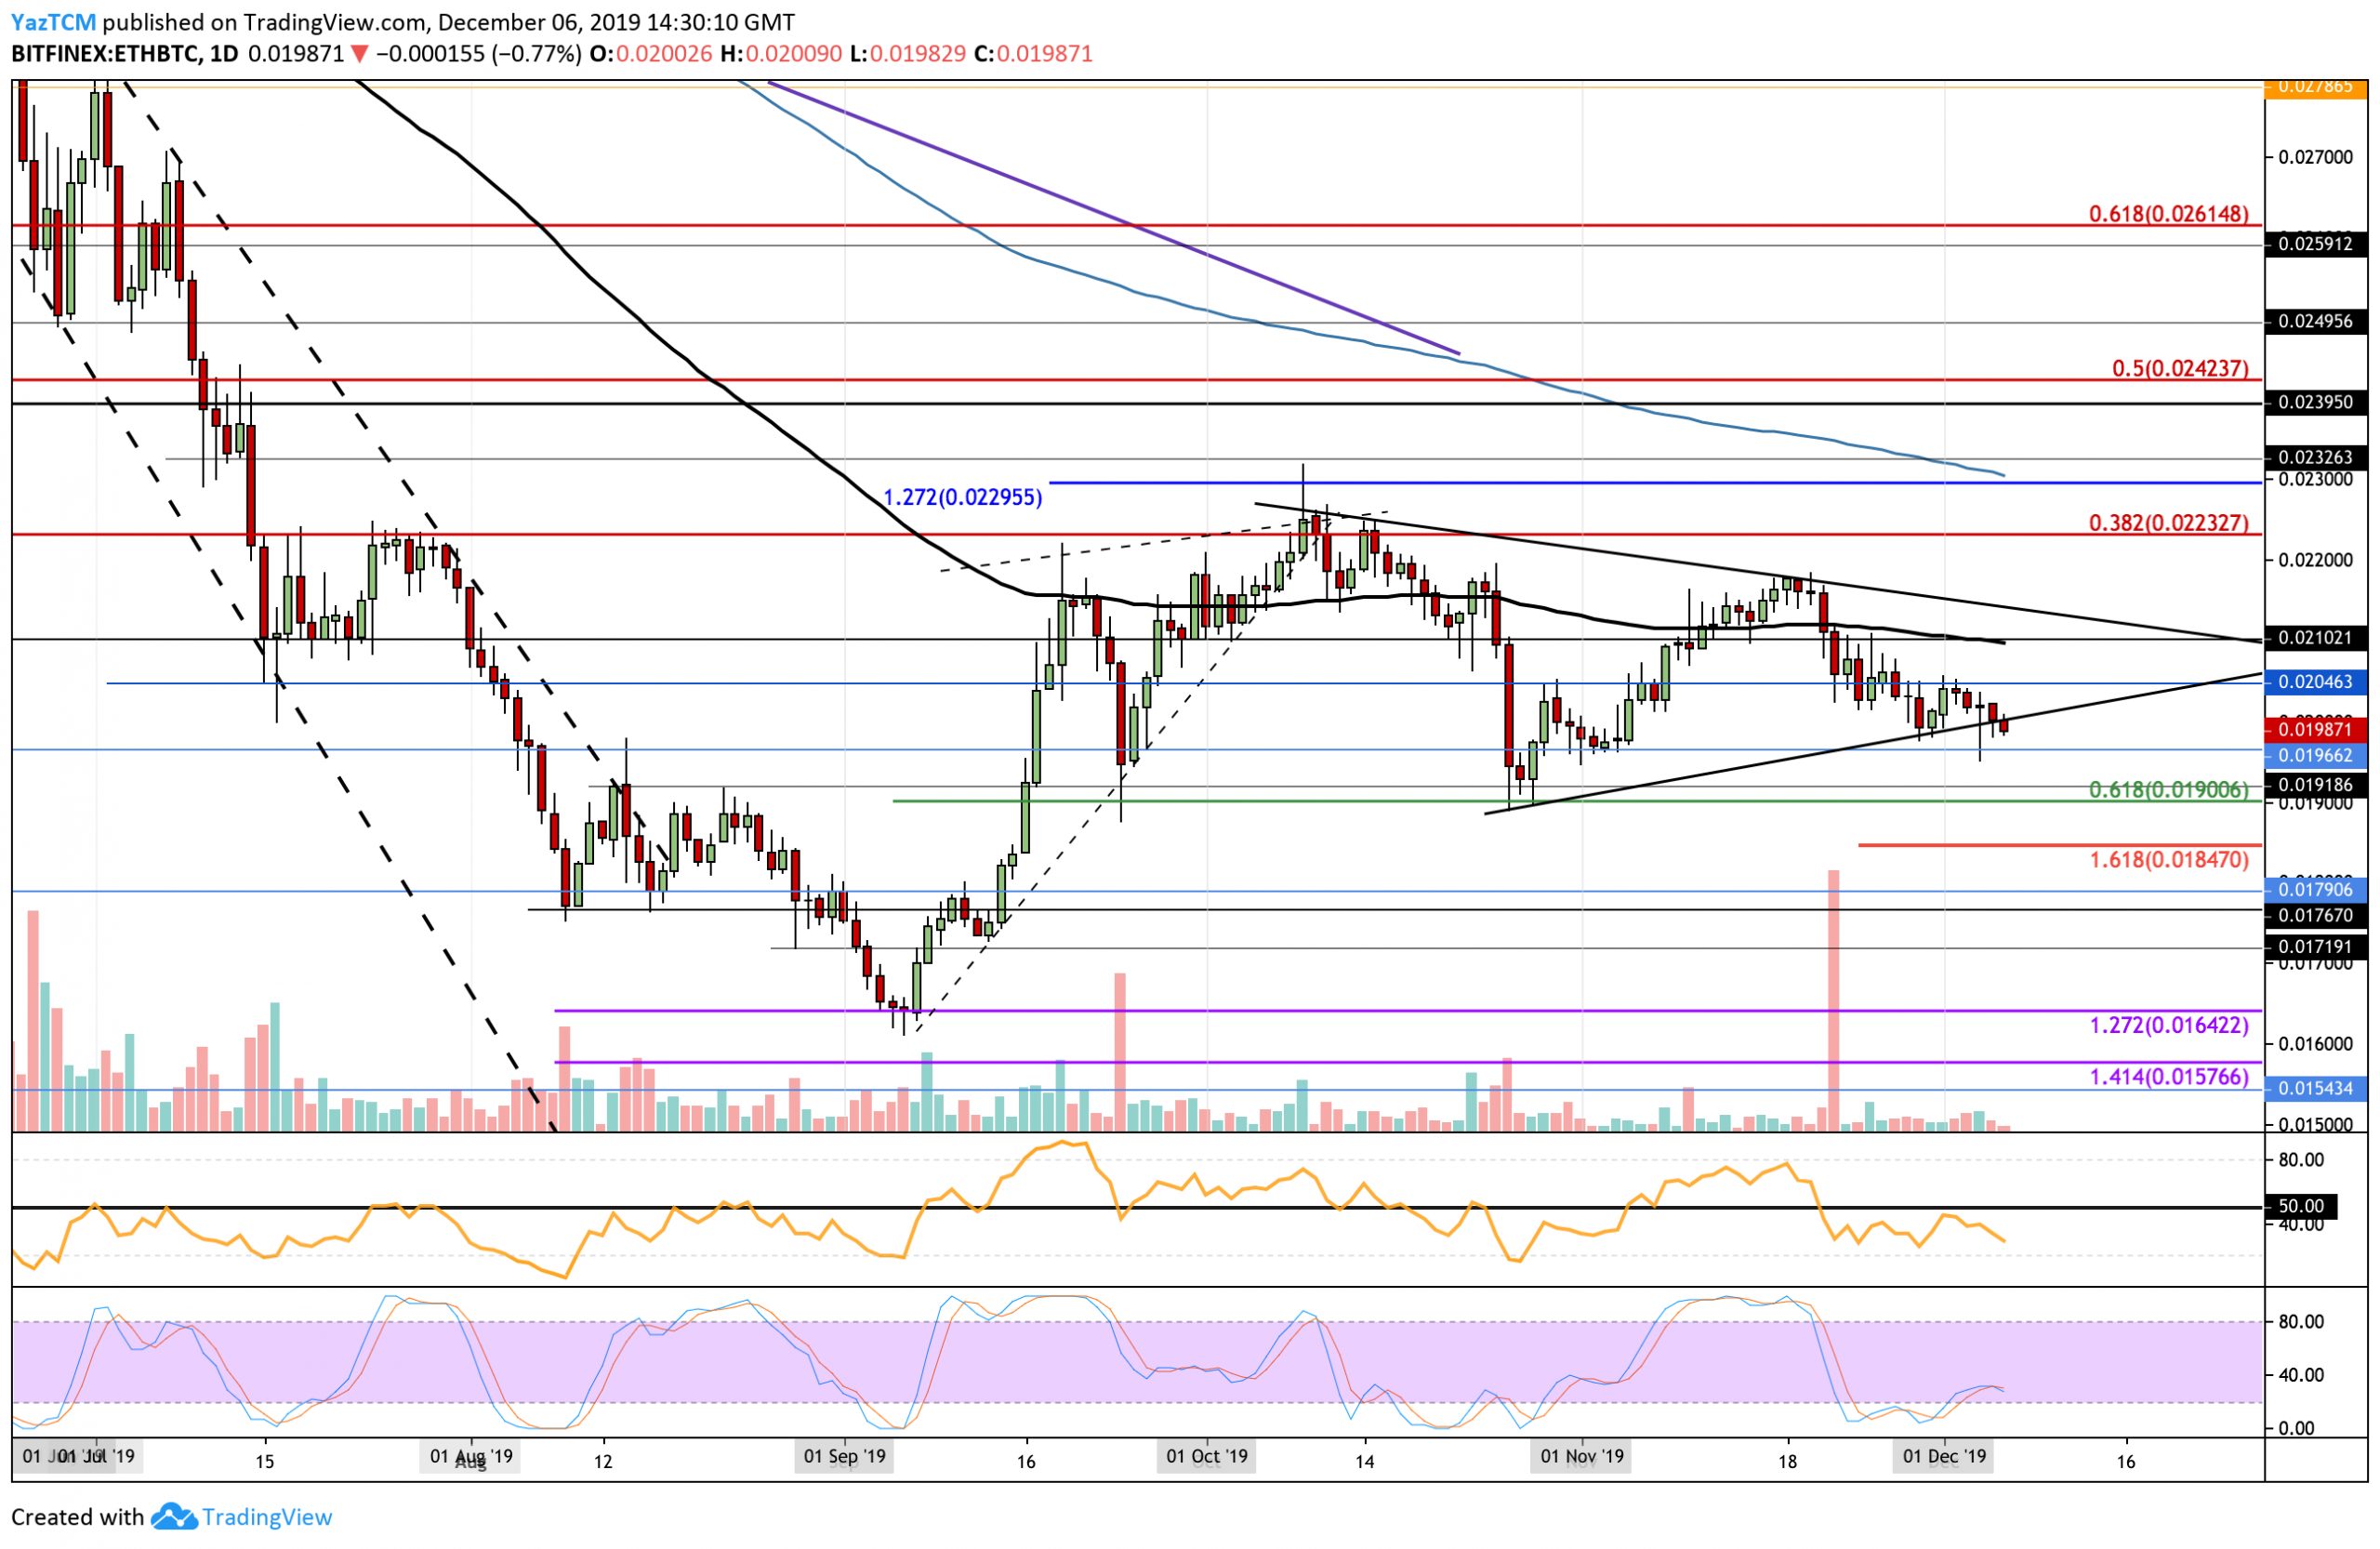 Crypto Price Analysis & Overview December 6th: Bitcoin, Ethereum, Ripple, Raven, and Matic